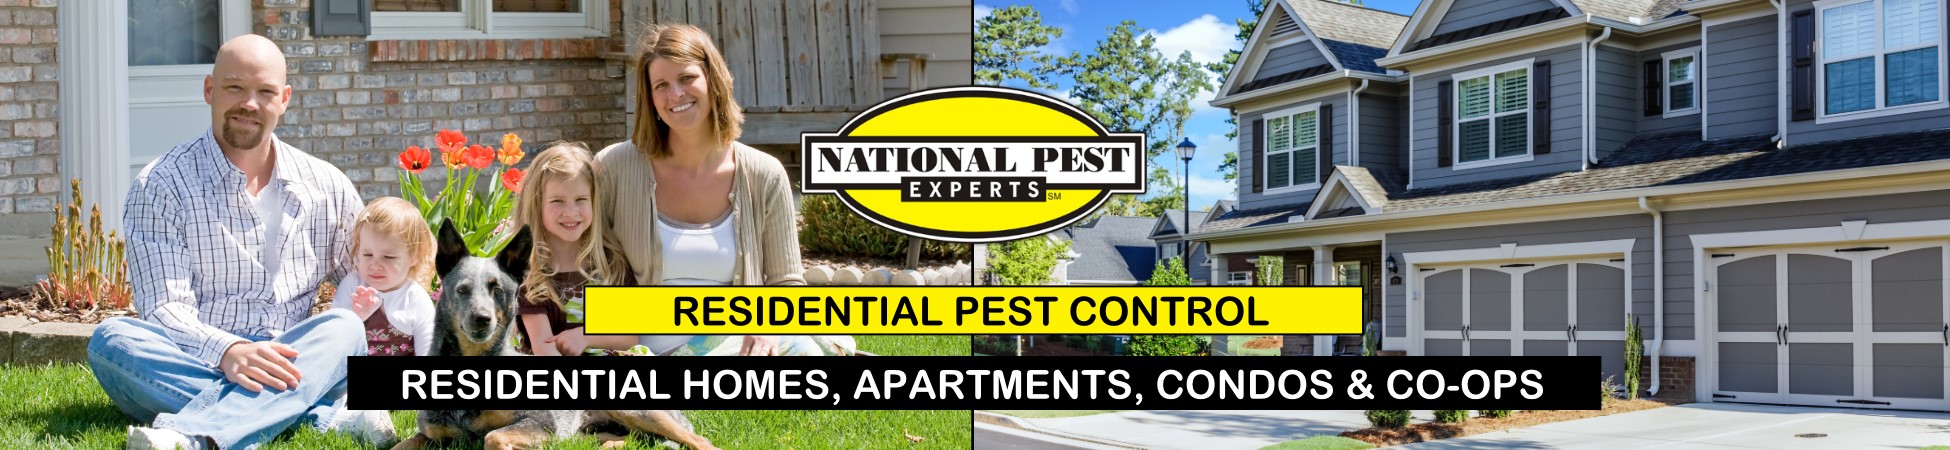 National Pest Experts - Residential exterminating and pest control in Northport, NY